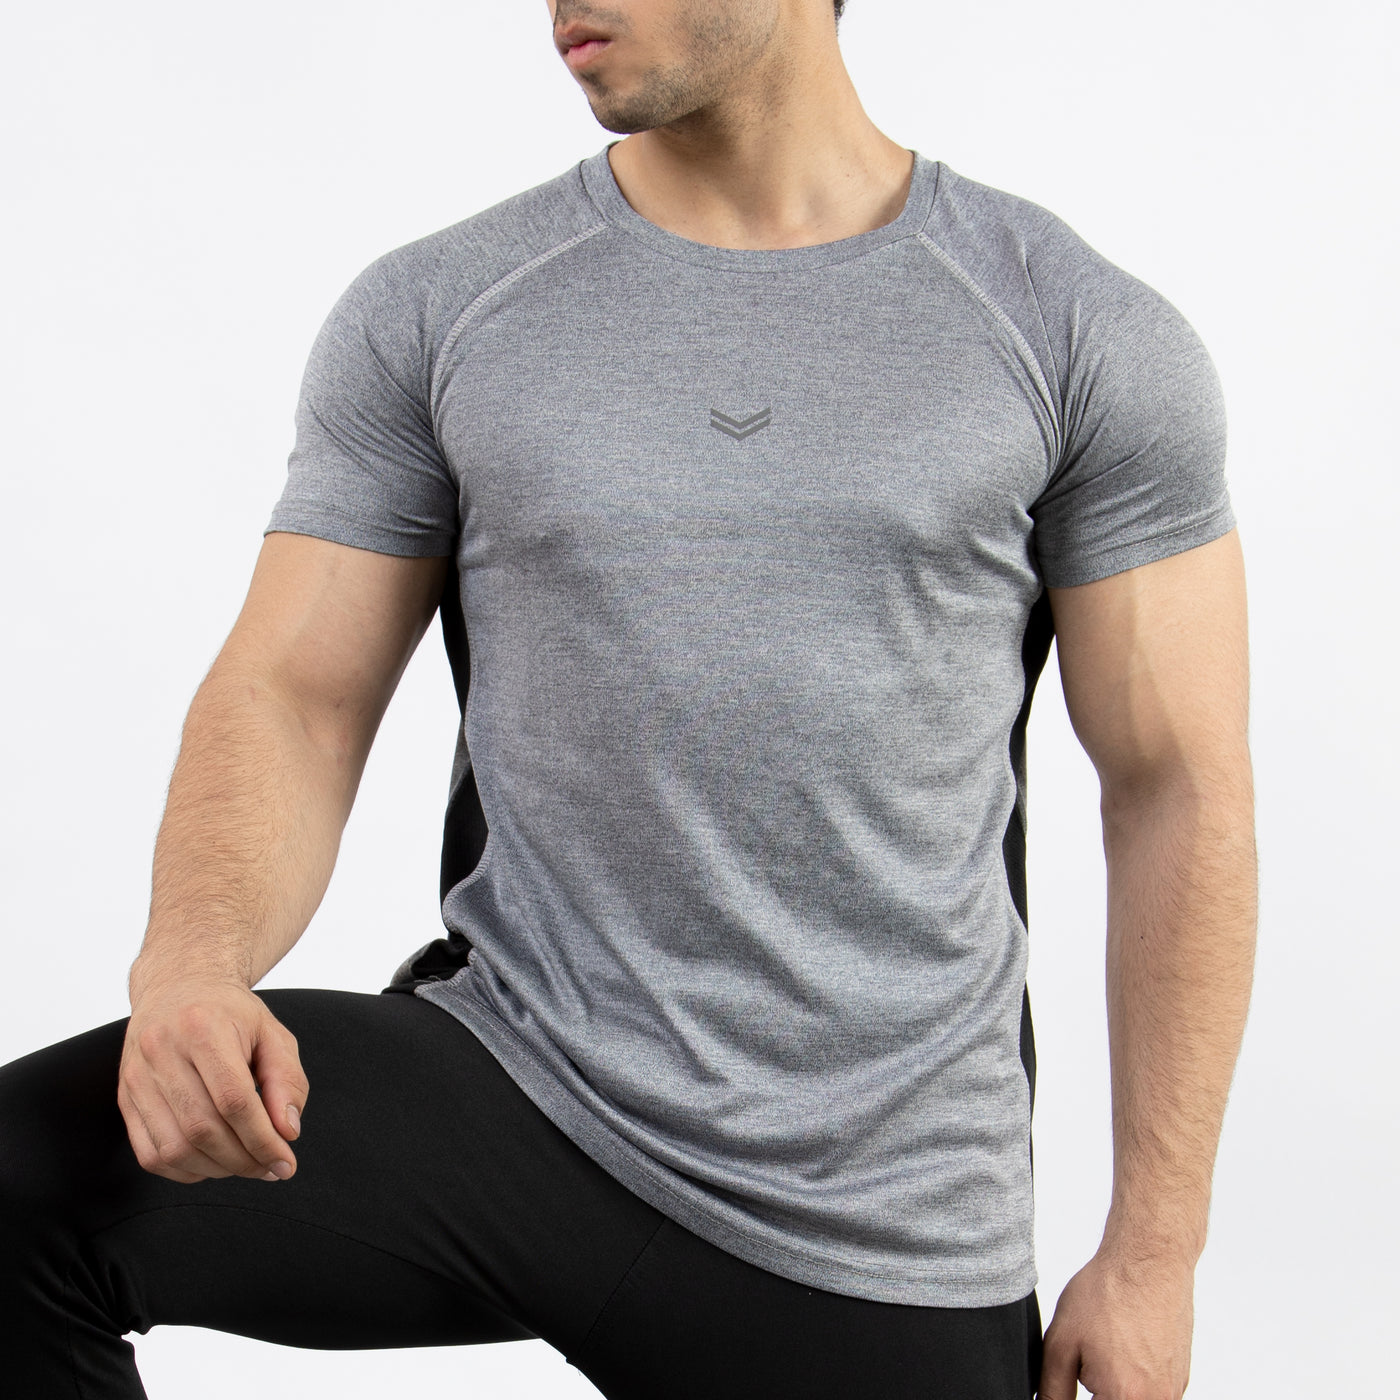 Textured Silver-Gray Quick Dry Tee with Thread Detailing & Black Panel